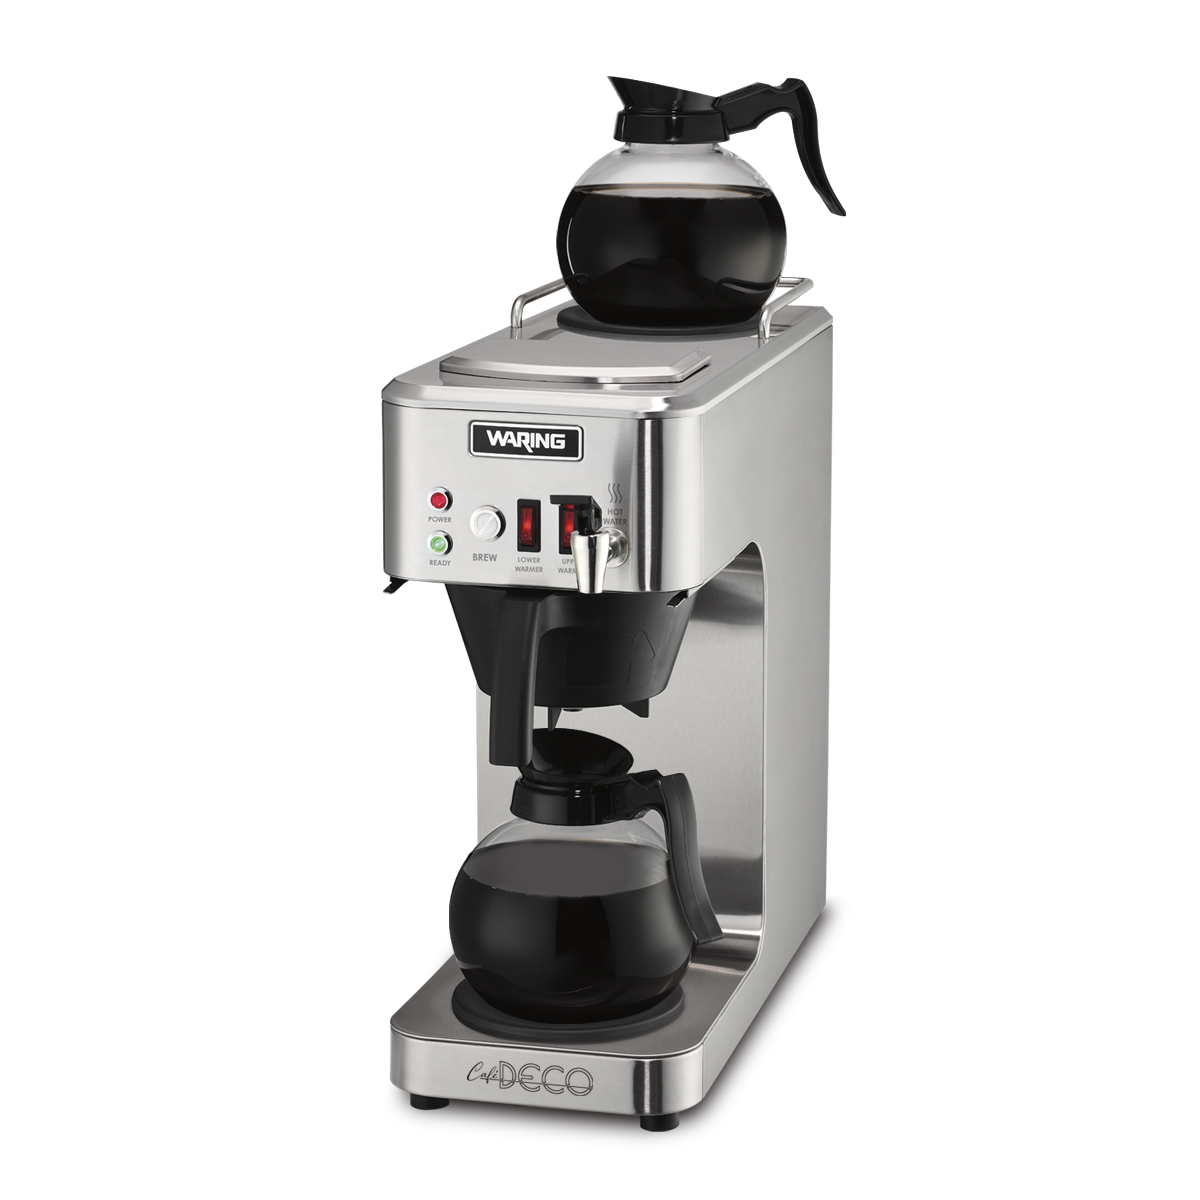 https://www.waringcommercialproducts.com/files/products/wcm50p-cafe-deco-automatic-coffee-brewer-inset-1-1200x1200.jpg